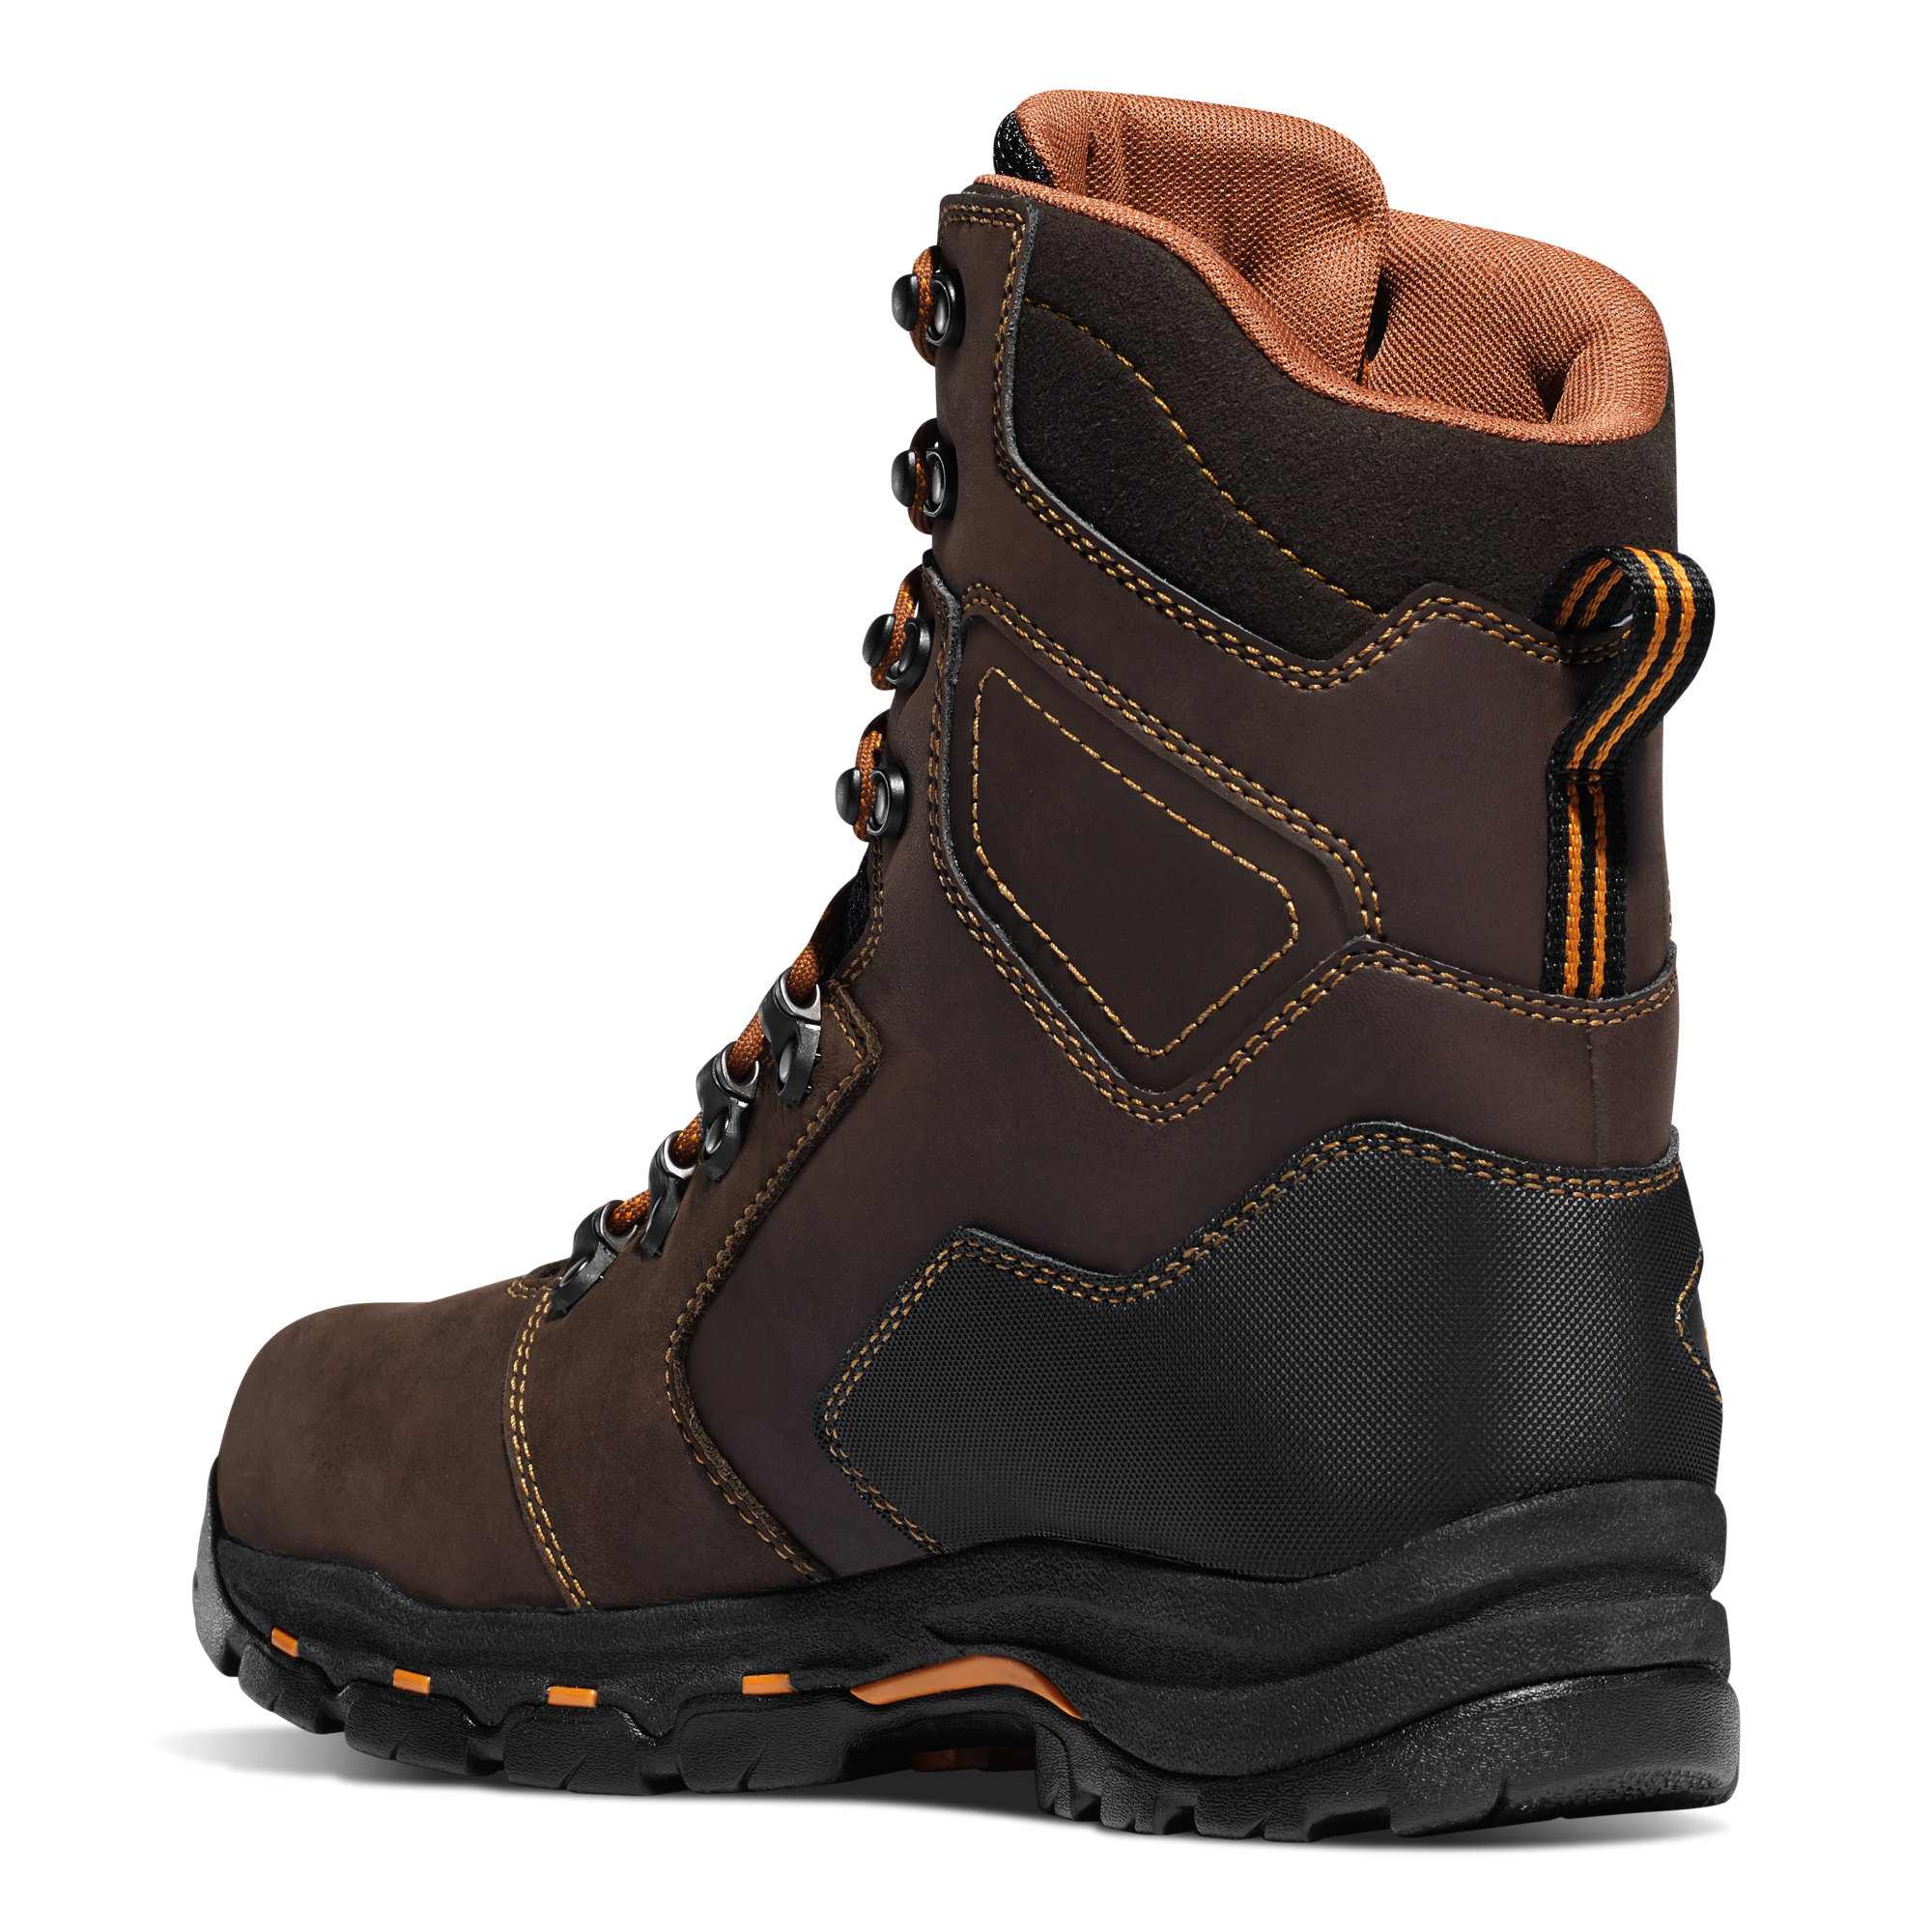 LaCrosse Men's Vicious 8 Inch Work Boots with Composite Toe (Brown) from Columbia Safety